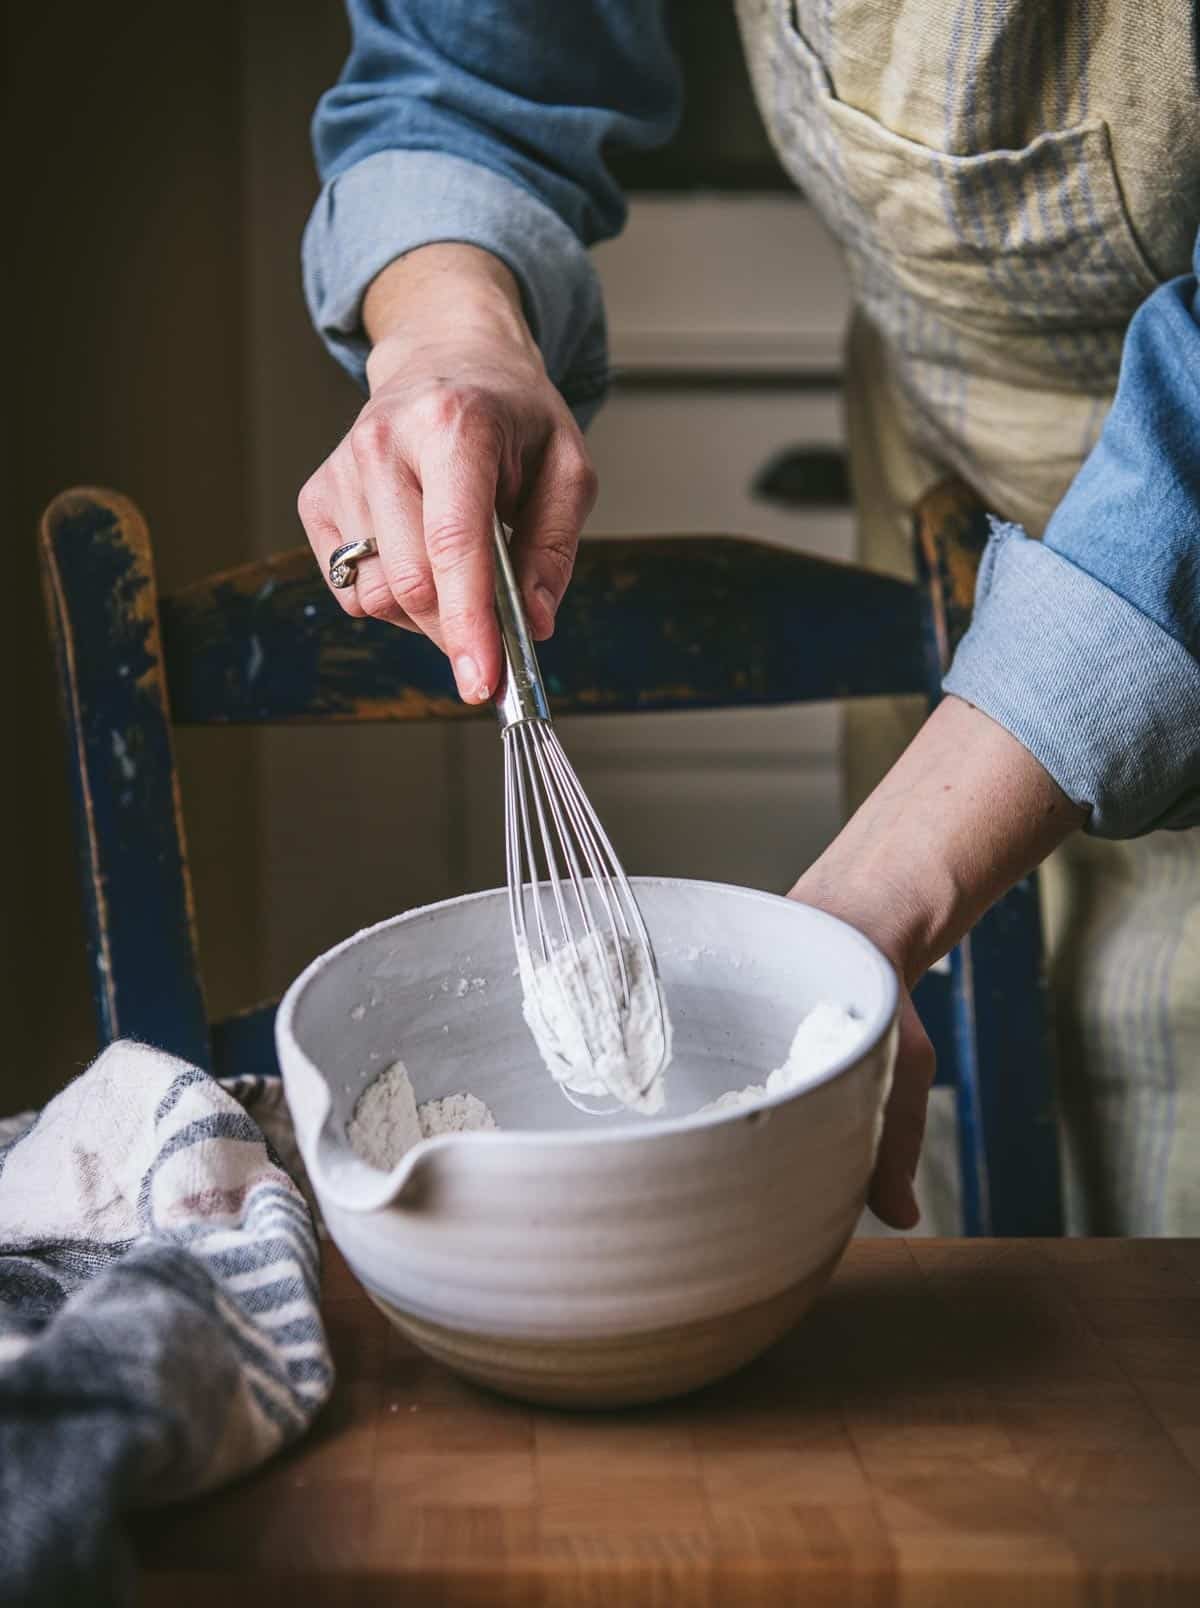 Whisking together dry ingredients in a small bowl.